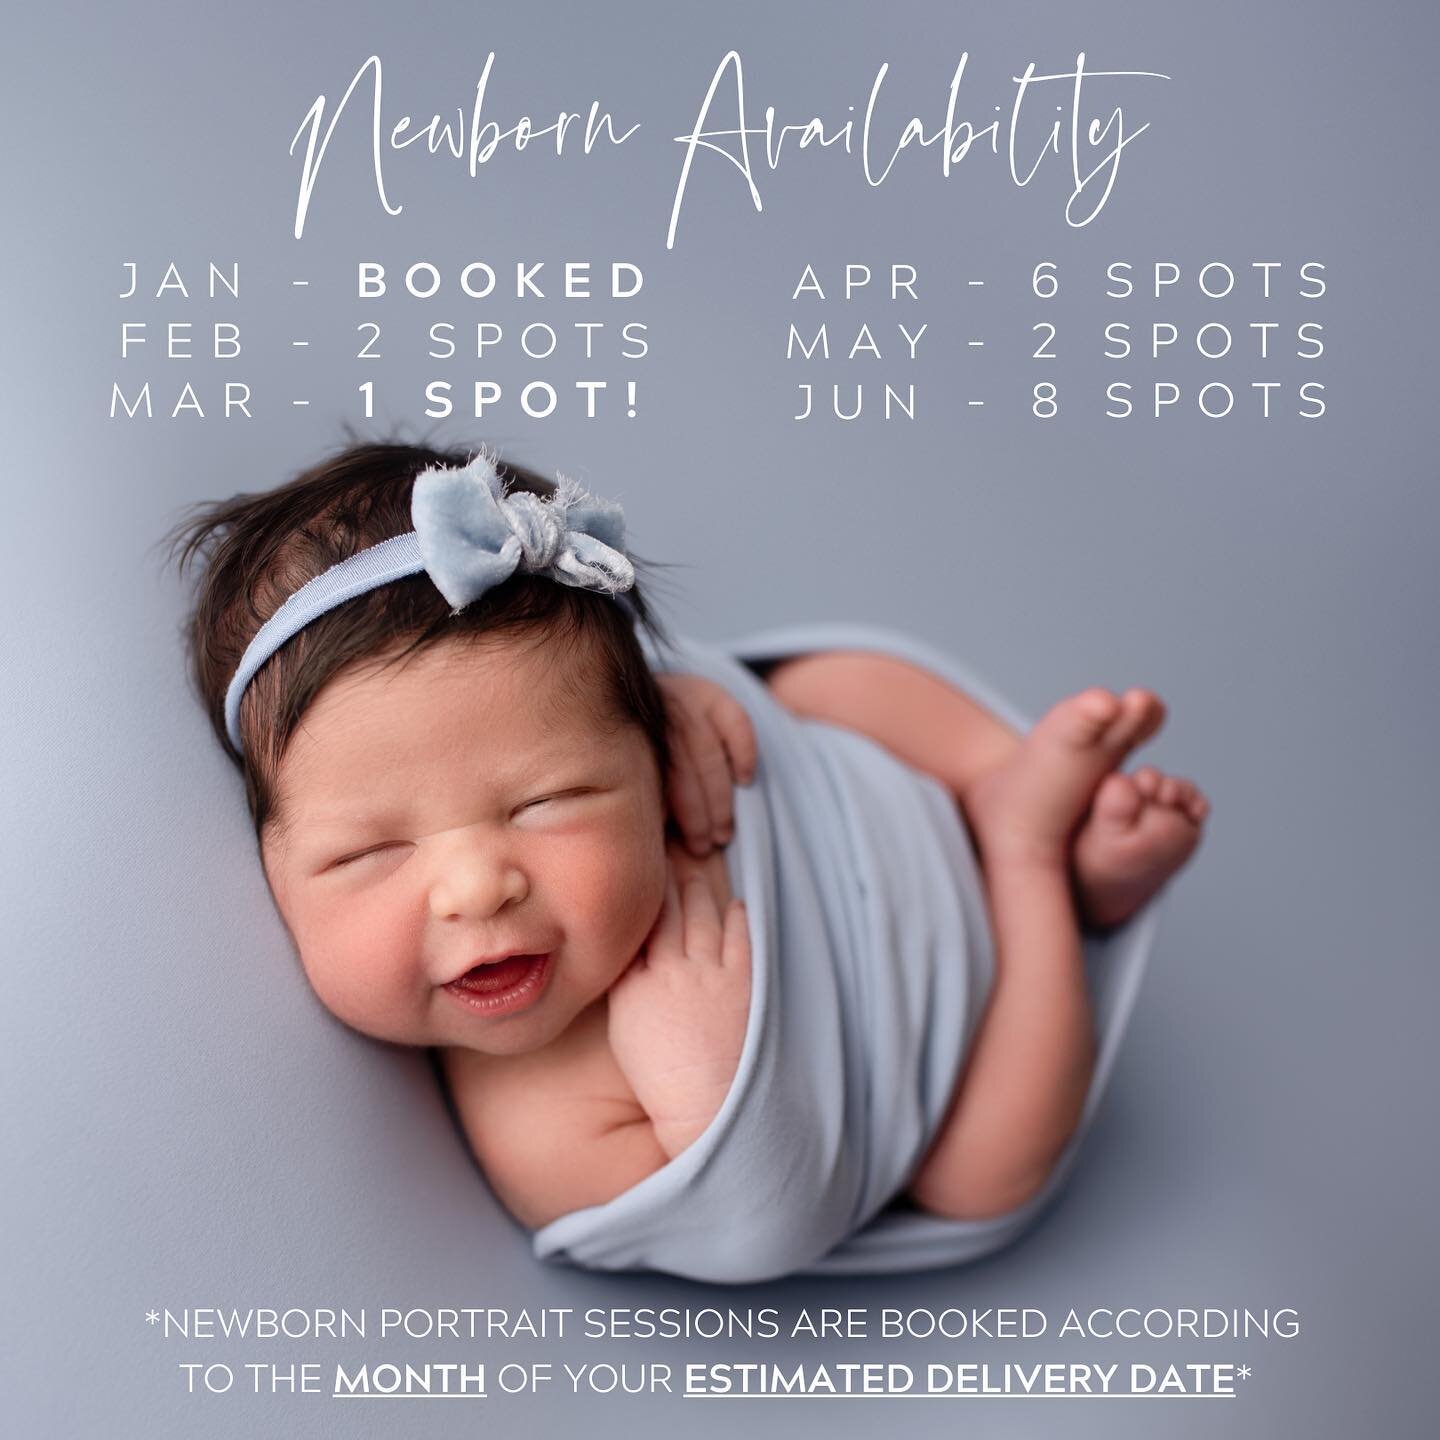 2023 may have just begun, but the first half of the year is already filling up very quickly! If you have new bundle arriving between February and June, it&rsquo;s time to reserve their Newborn Portrait Session. The Studio&rsquo;s Calendar typically f